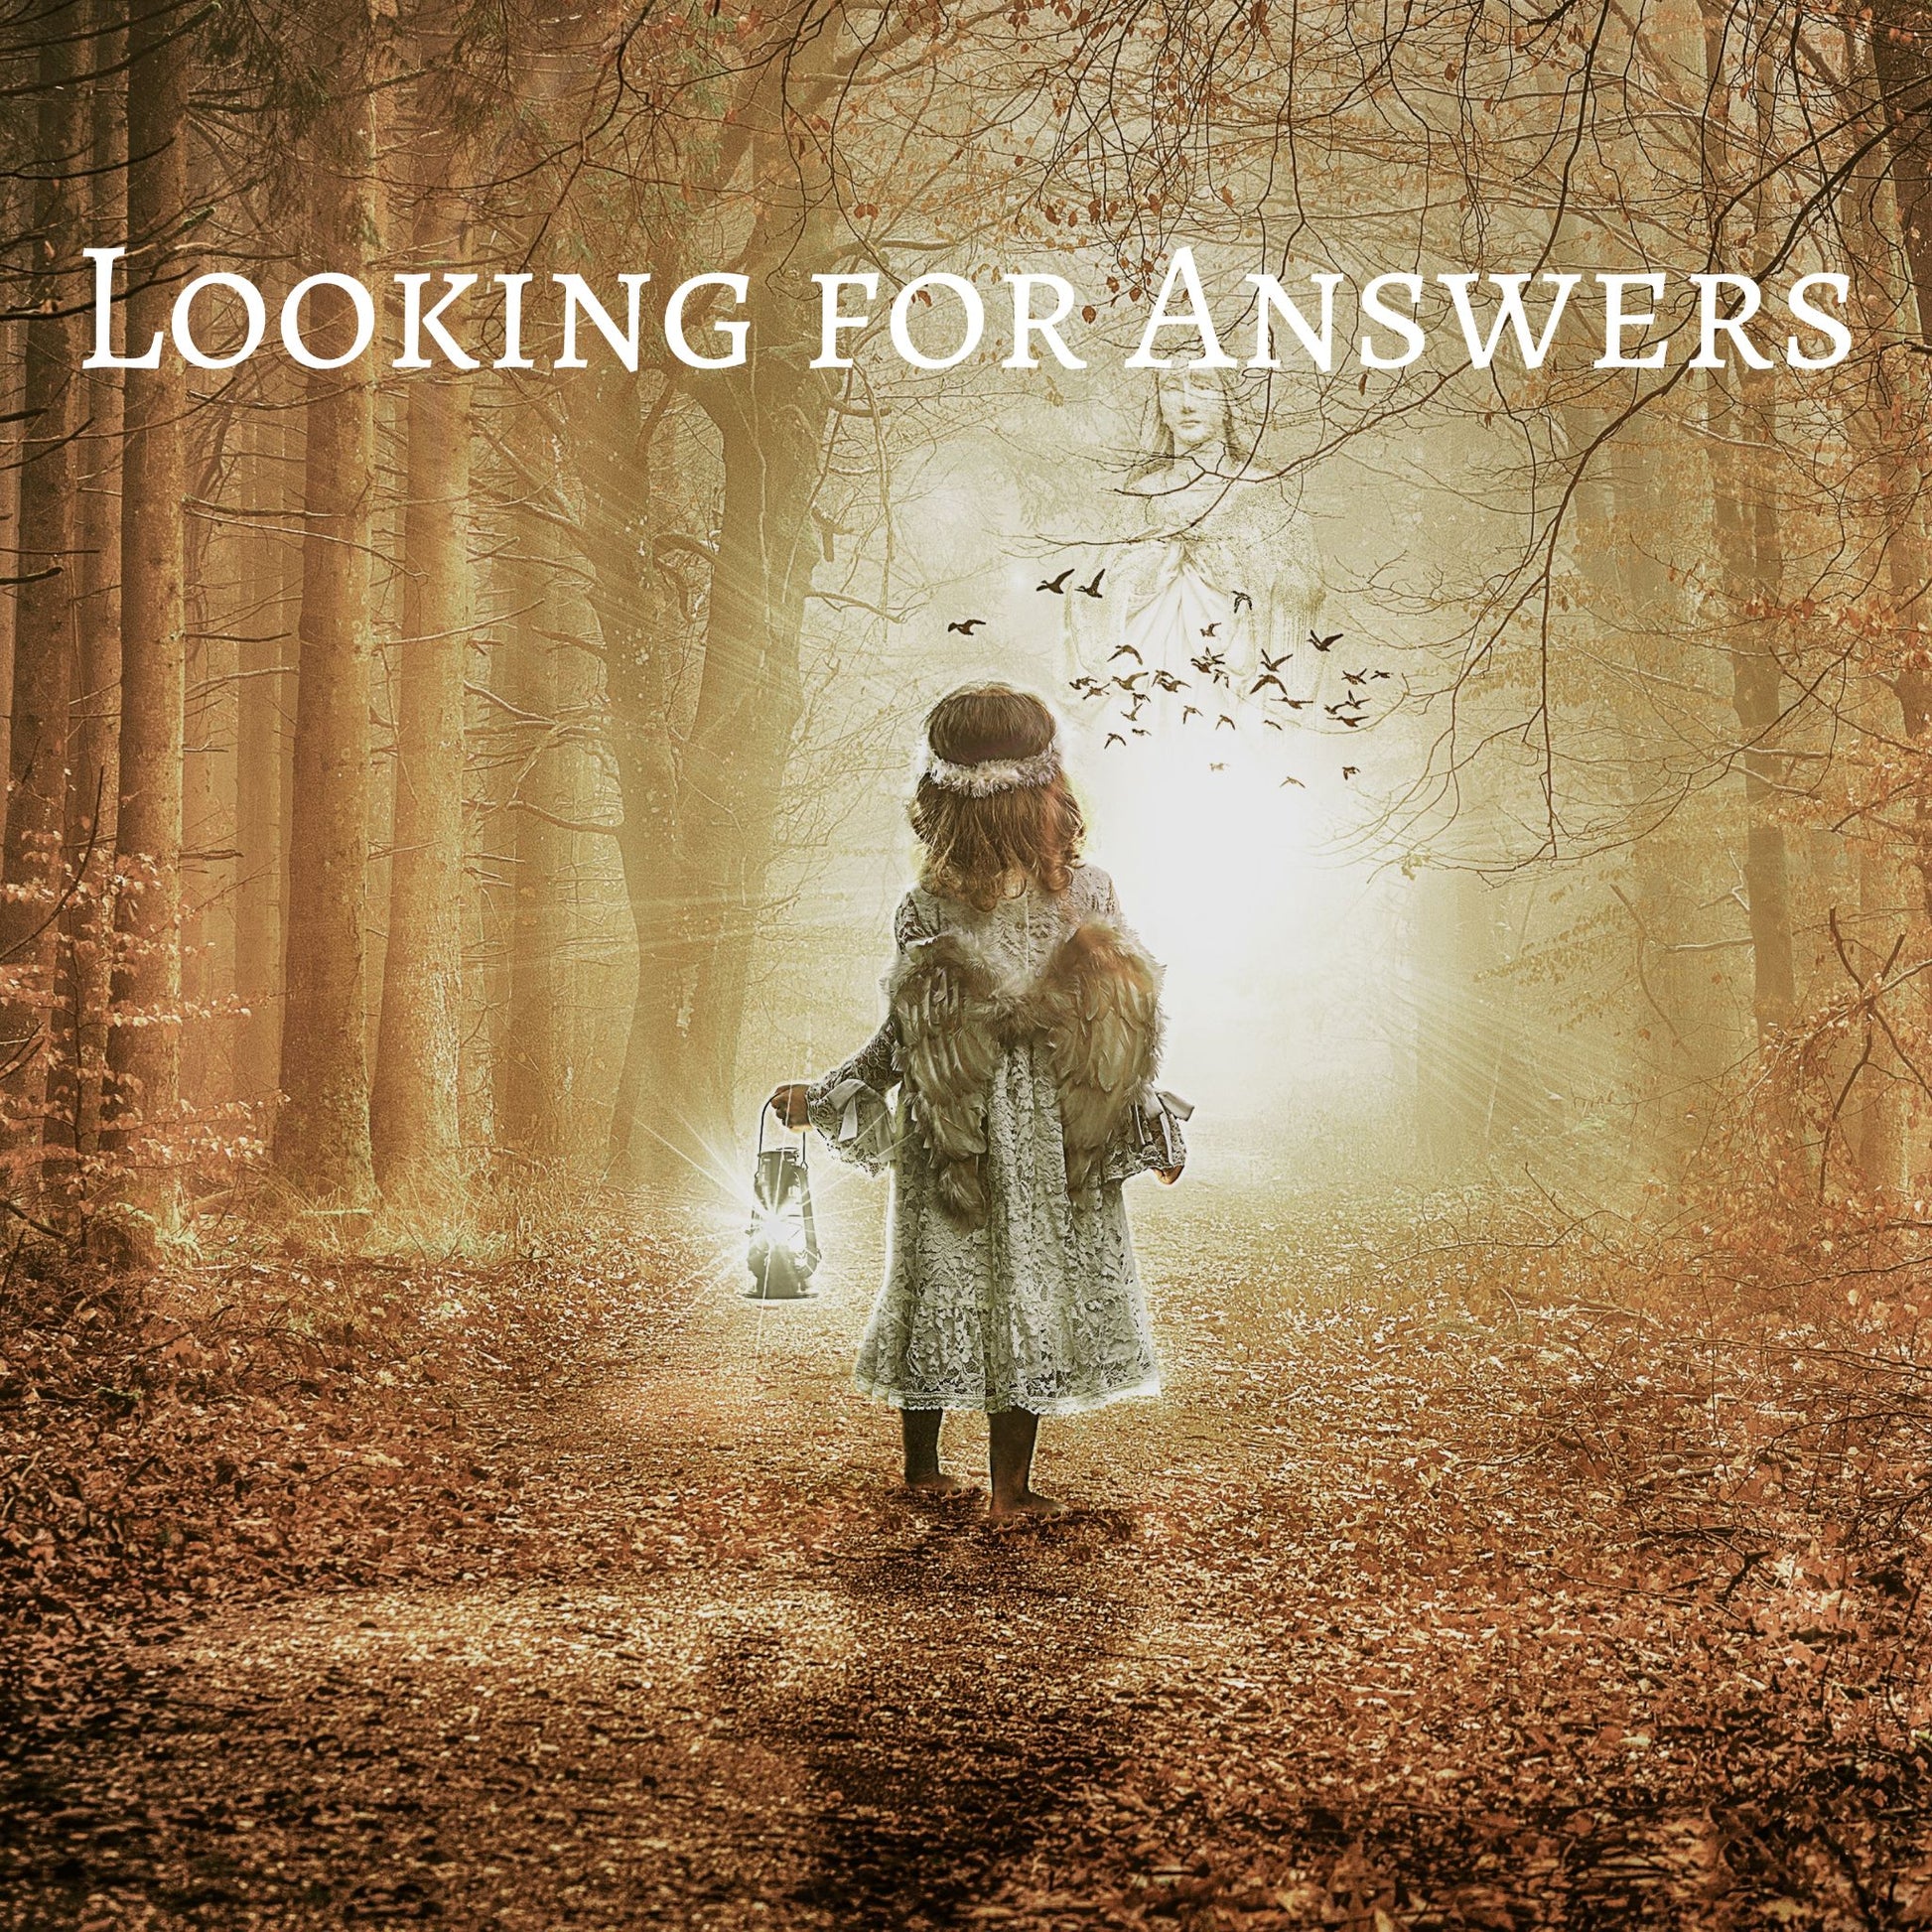 CD Cover of song Looking for Answers